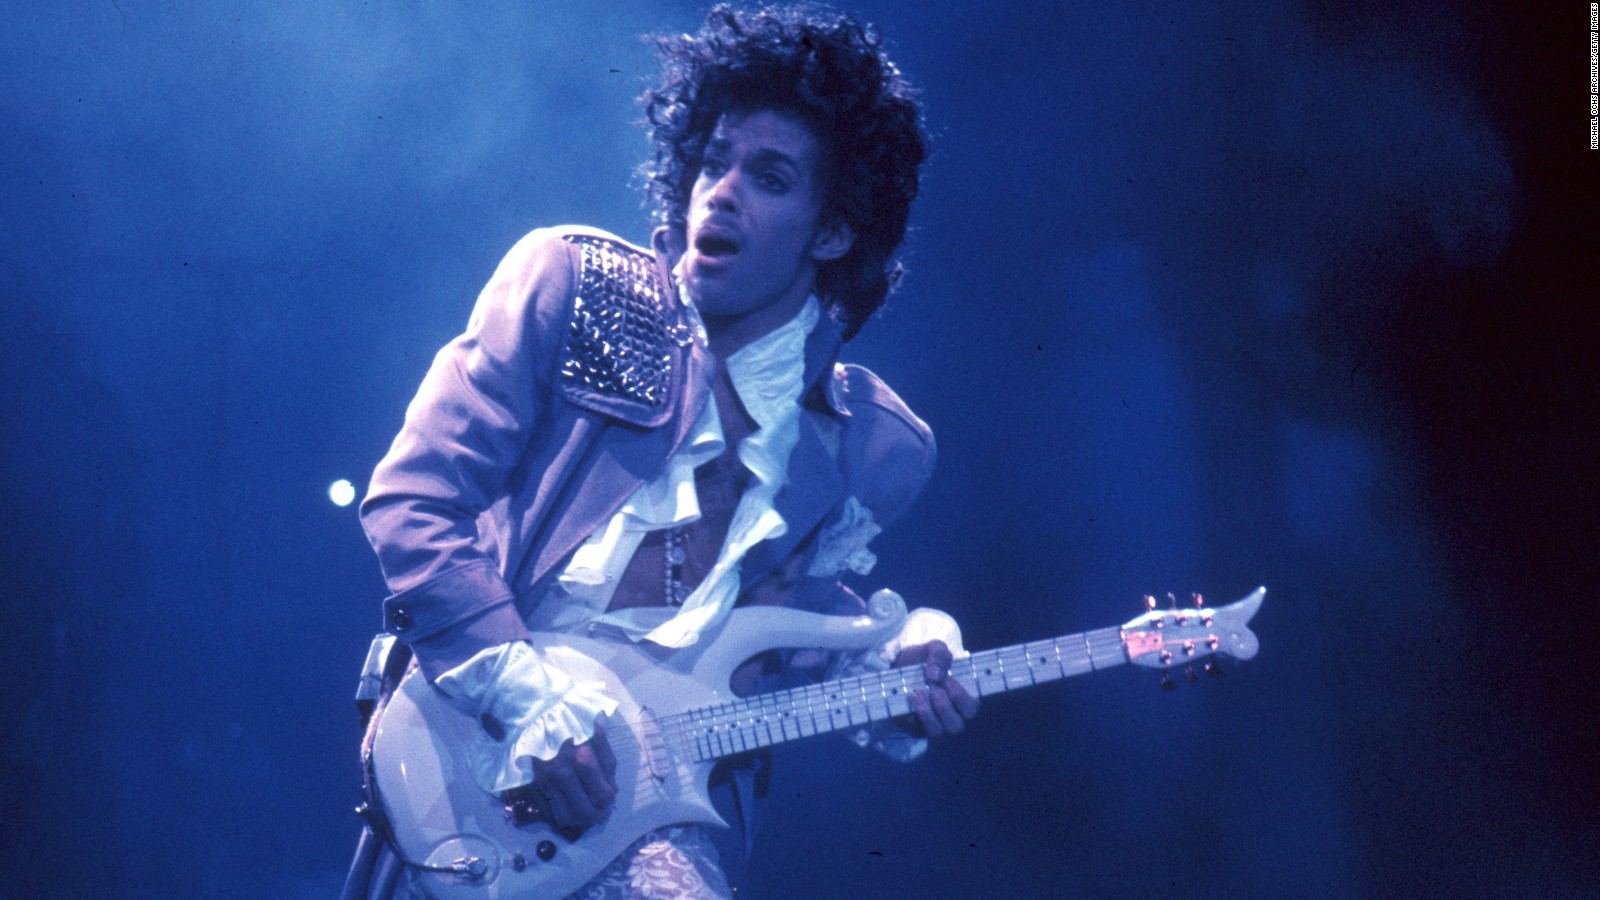 Image result for prince guitar face